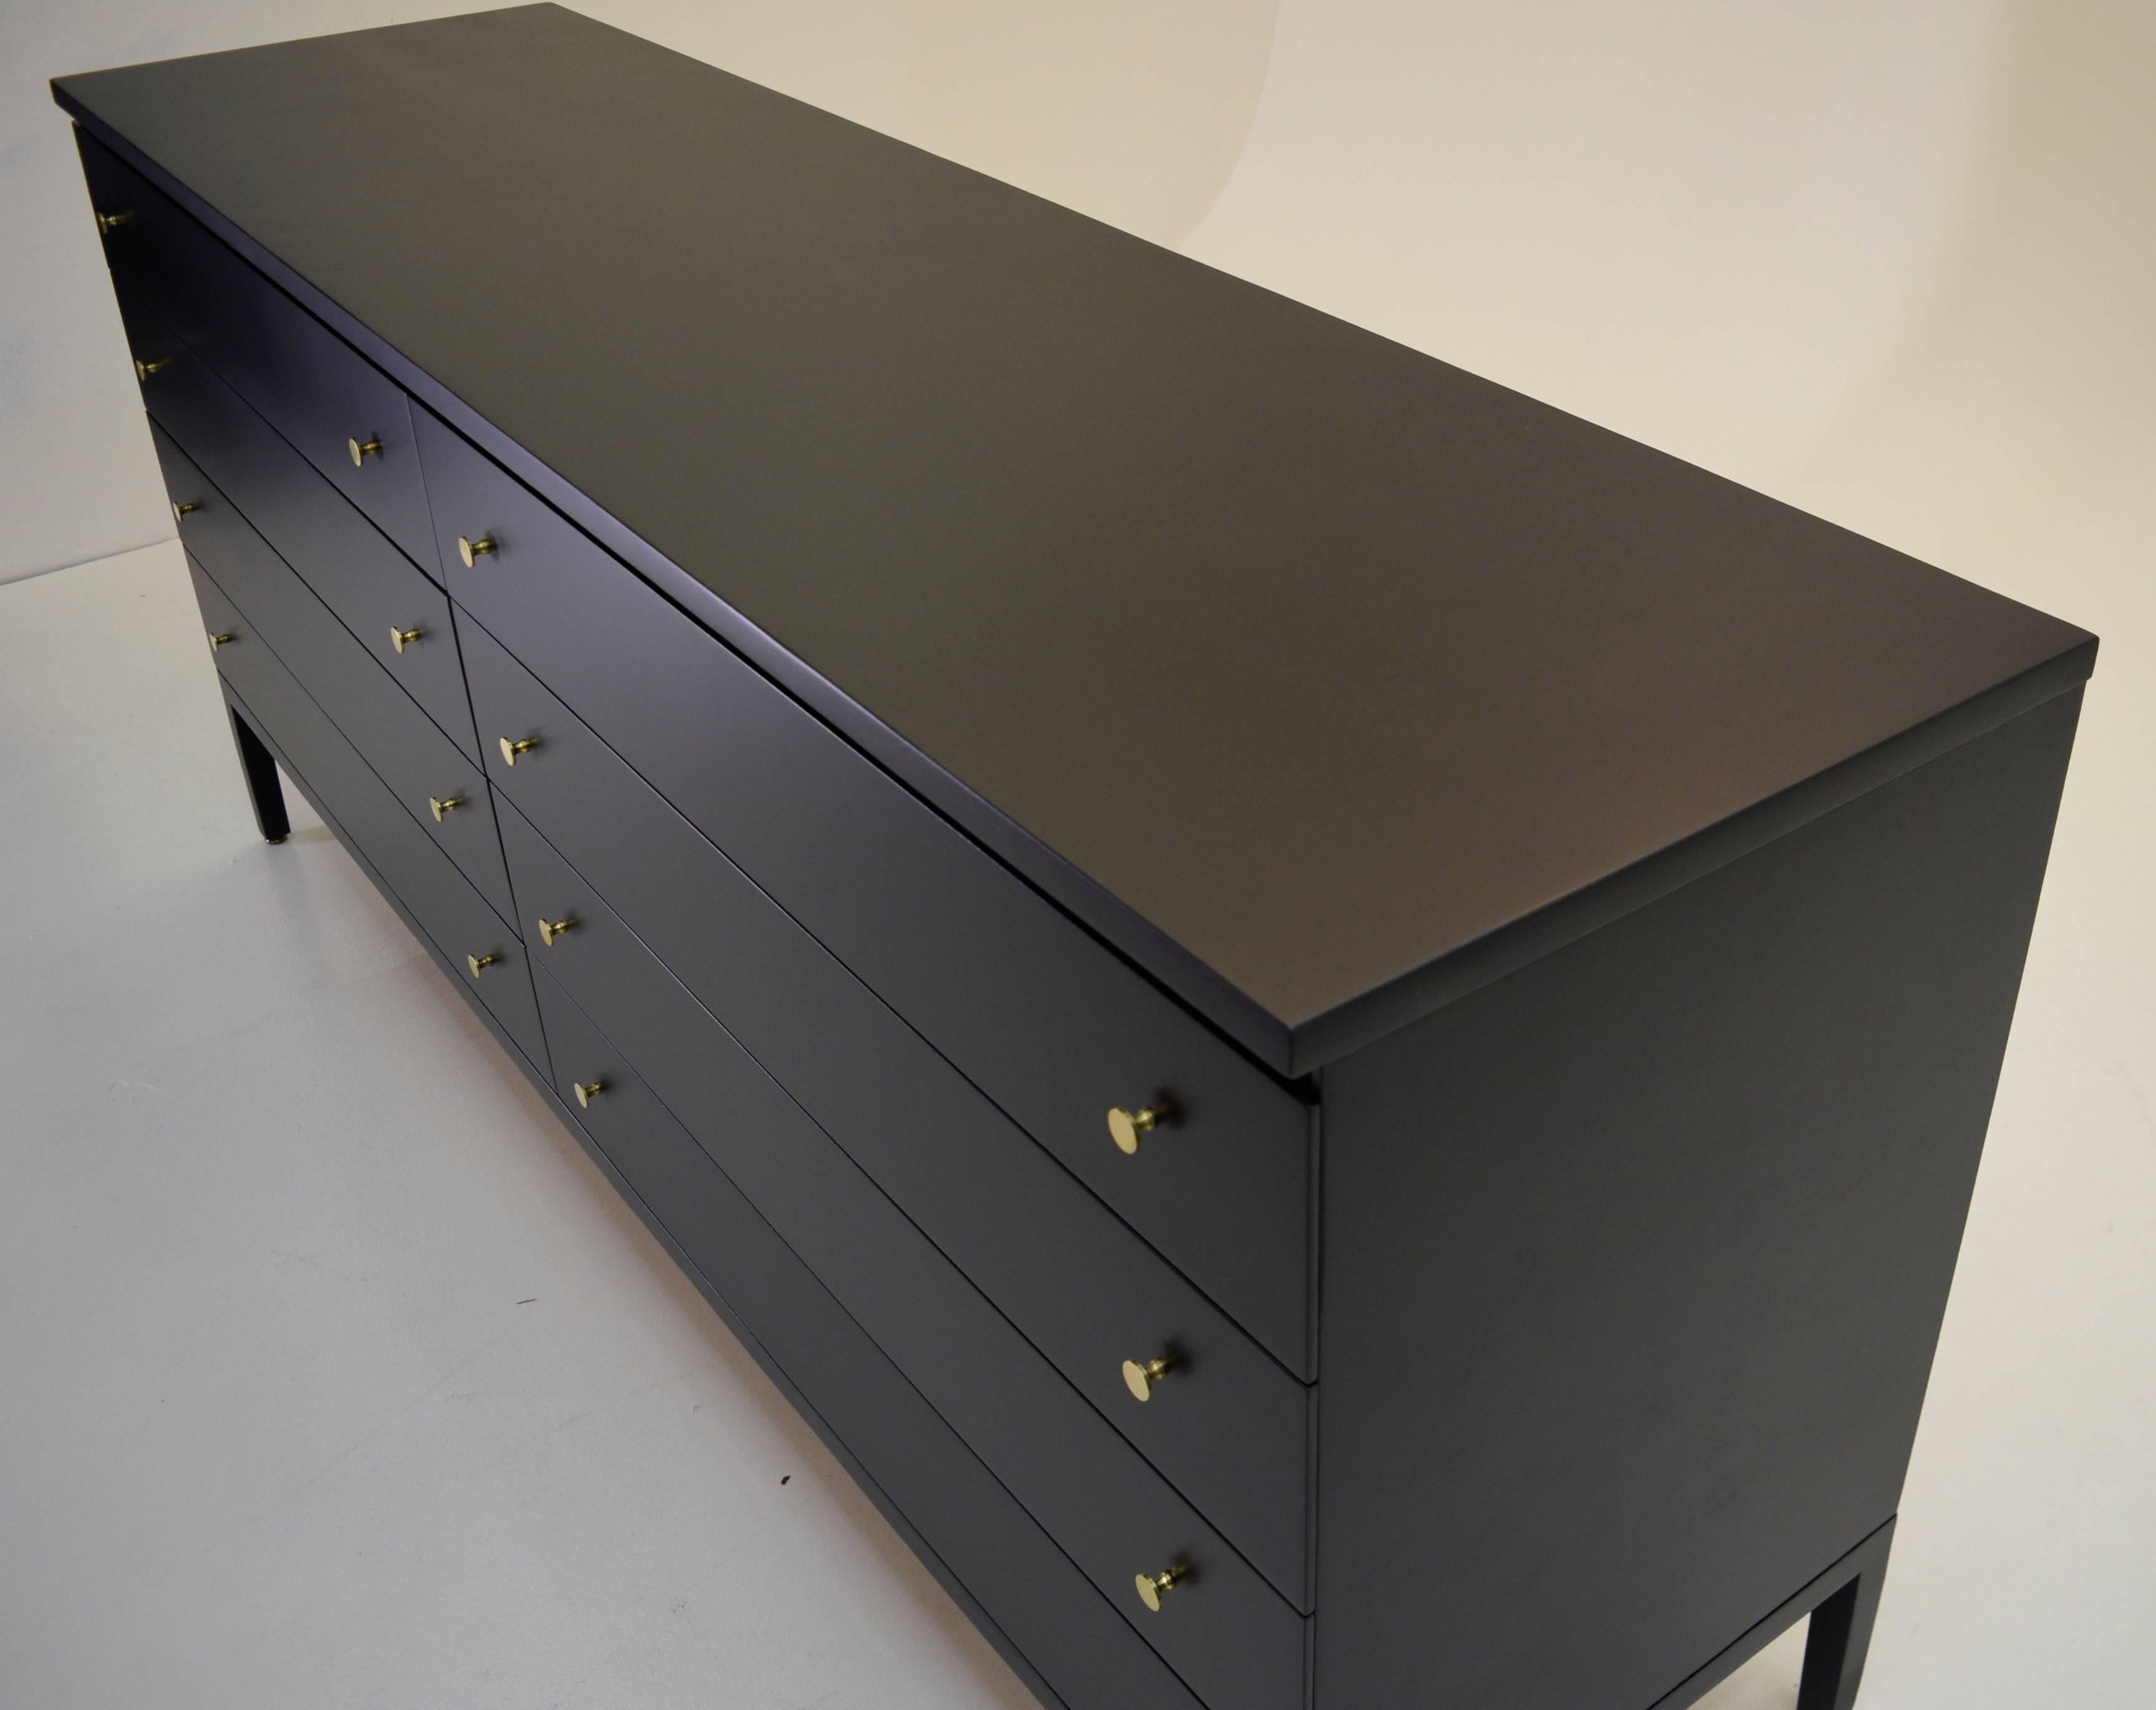 Paul McCobb, Calvin, Irwin Collection
USA, Grand Rapids, 1950s
Mahogany, black lacquer, brass
Measures: 71.25 wide 19 deep and 32.25 tall

A sophisticated and large dresser by Paul McCobb in black lacquer. In black, making a masculine and bold